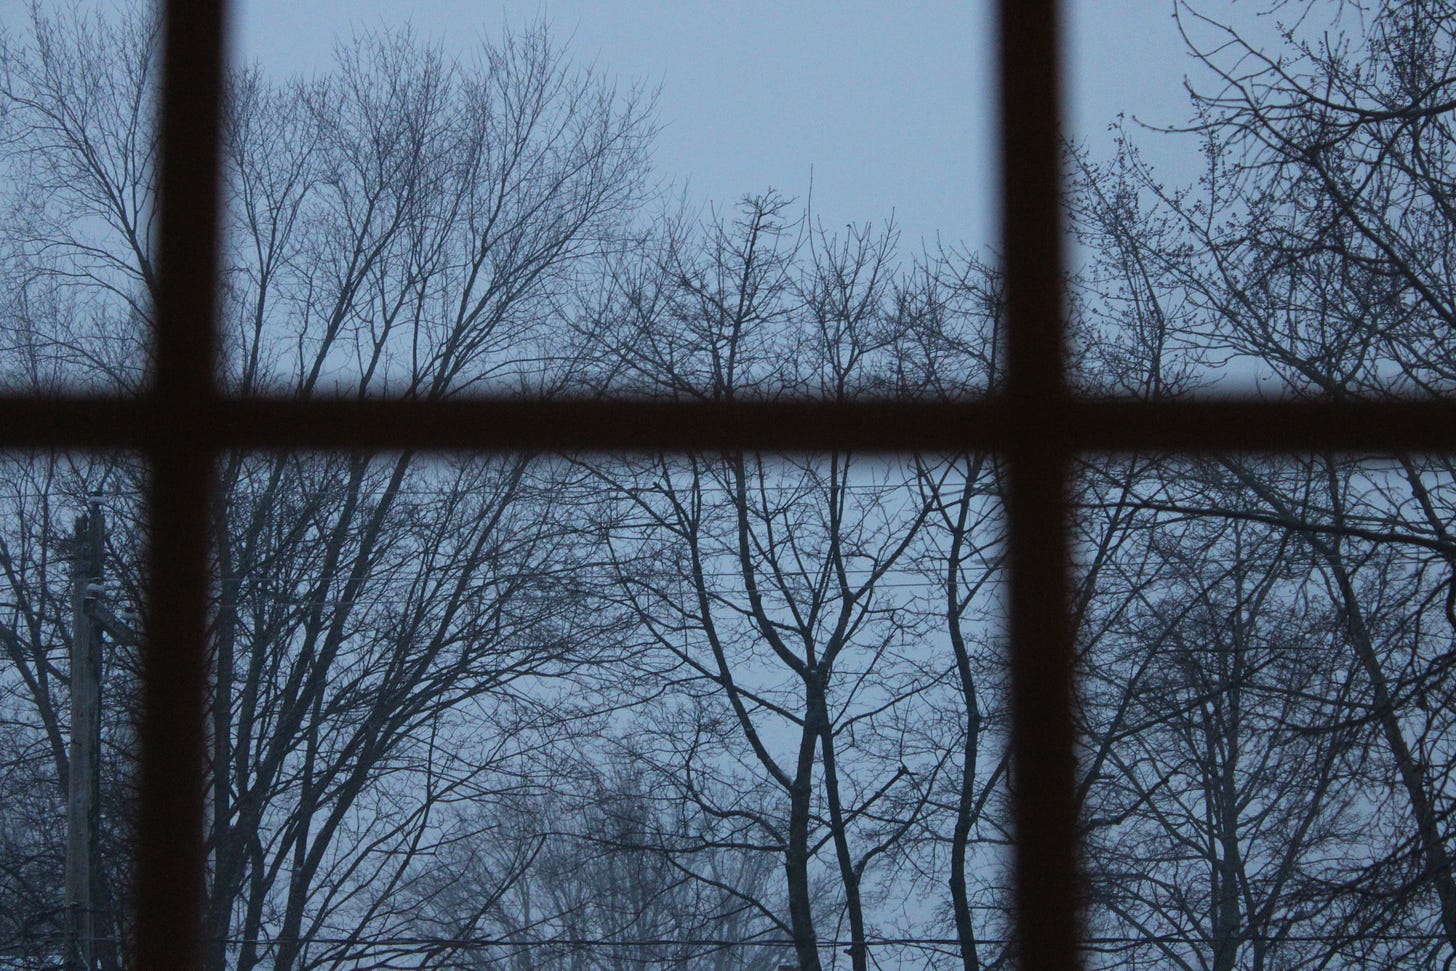 Spindly tree branches are clear behind the blurry cross hatches of a window pane.